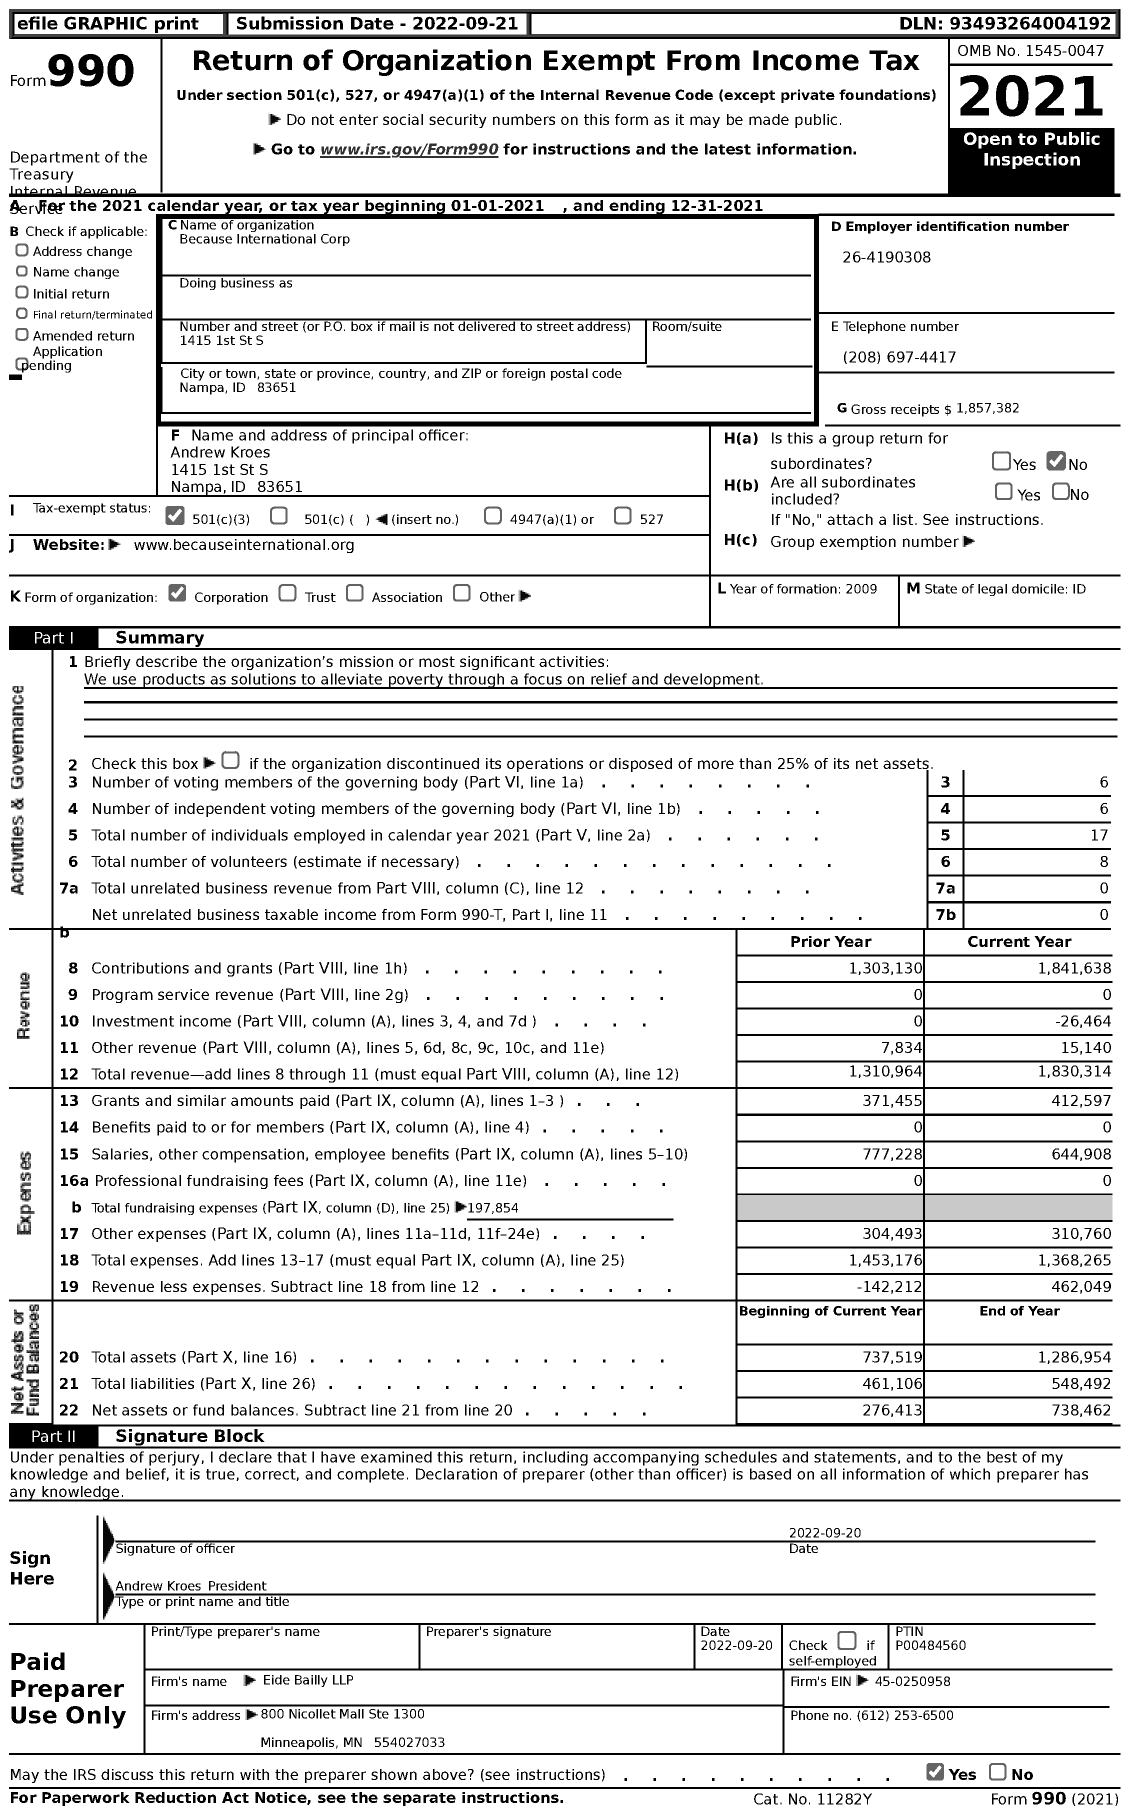 Image of first page of 2021 Form 990 for Because International Corp